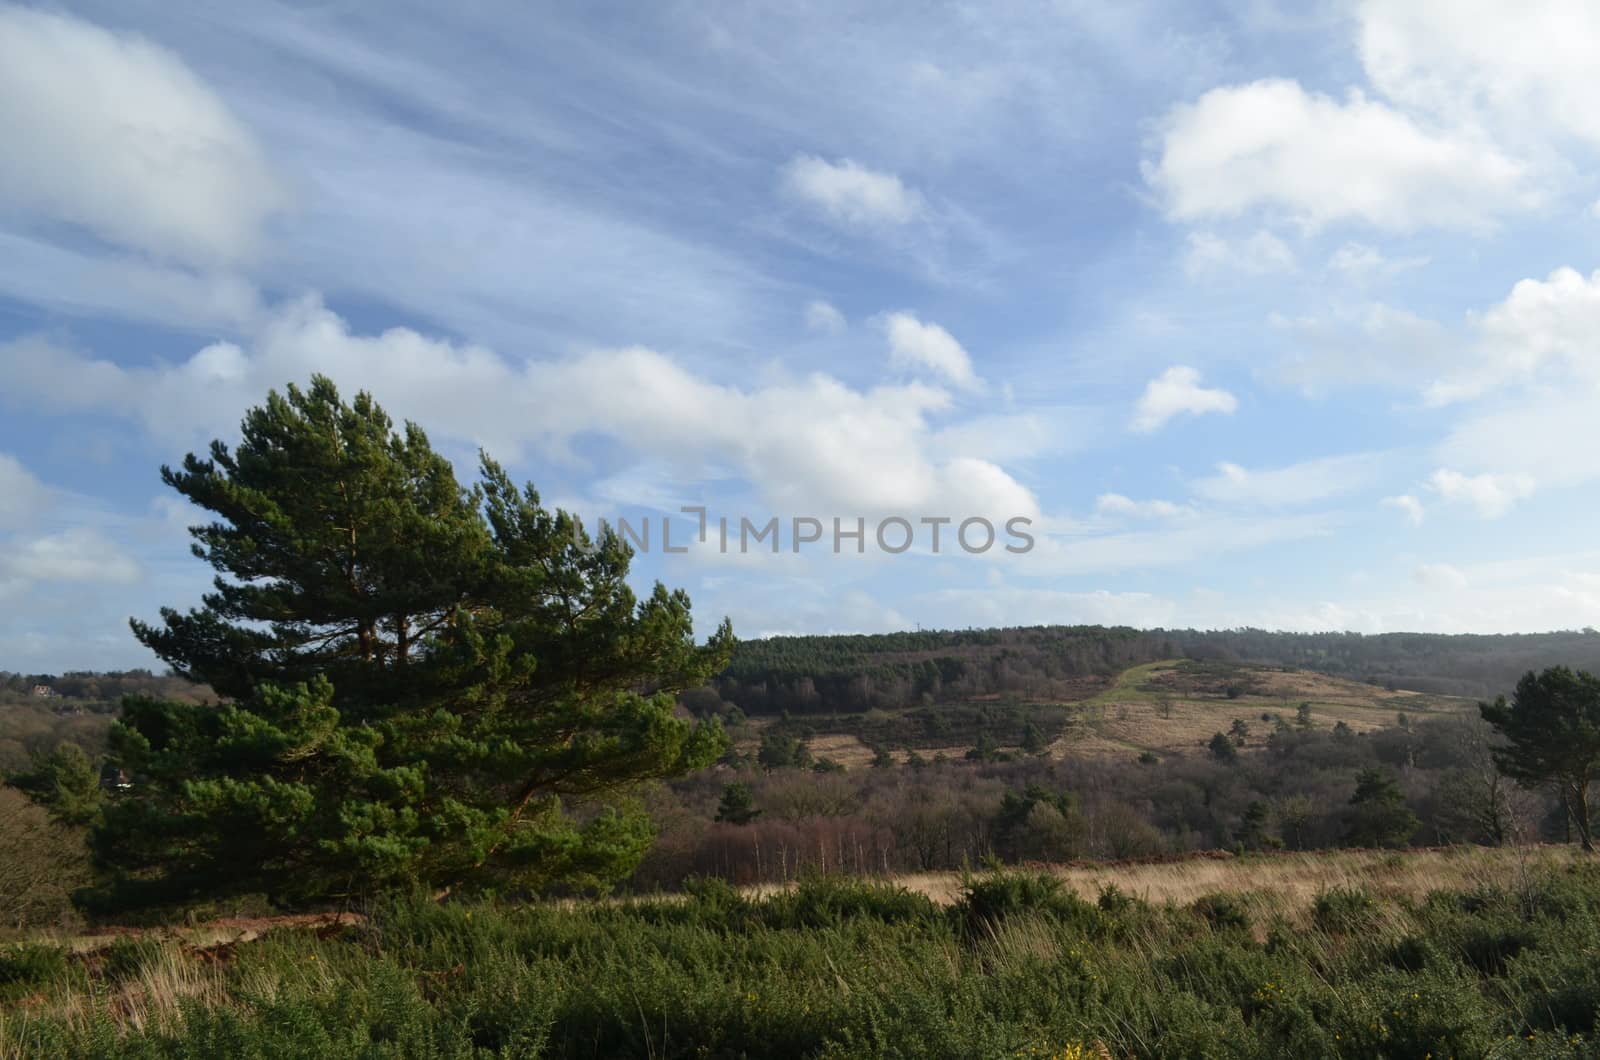 Ashdown Forest in Sussex, England. Once used by the Monachacy for deer hunting it is now one of the largest free public open spaces in Southern England.